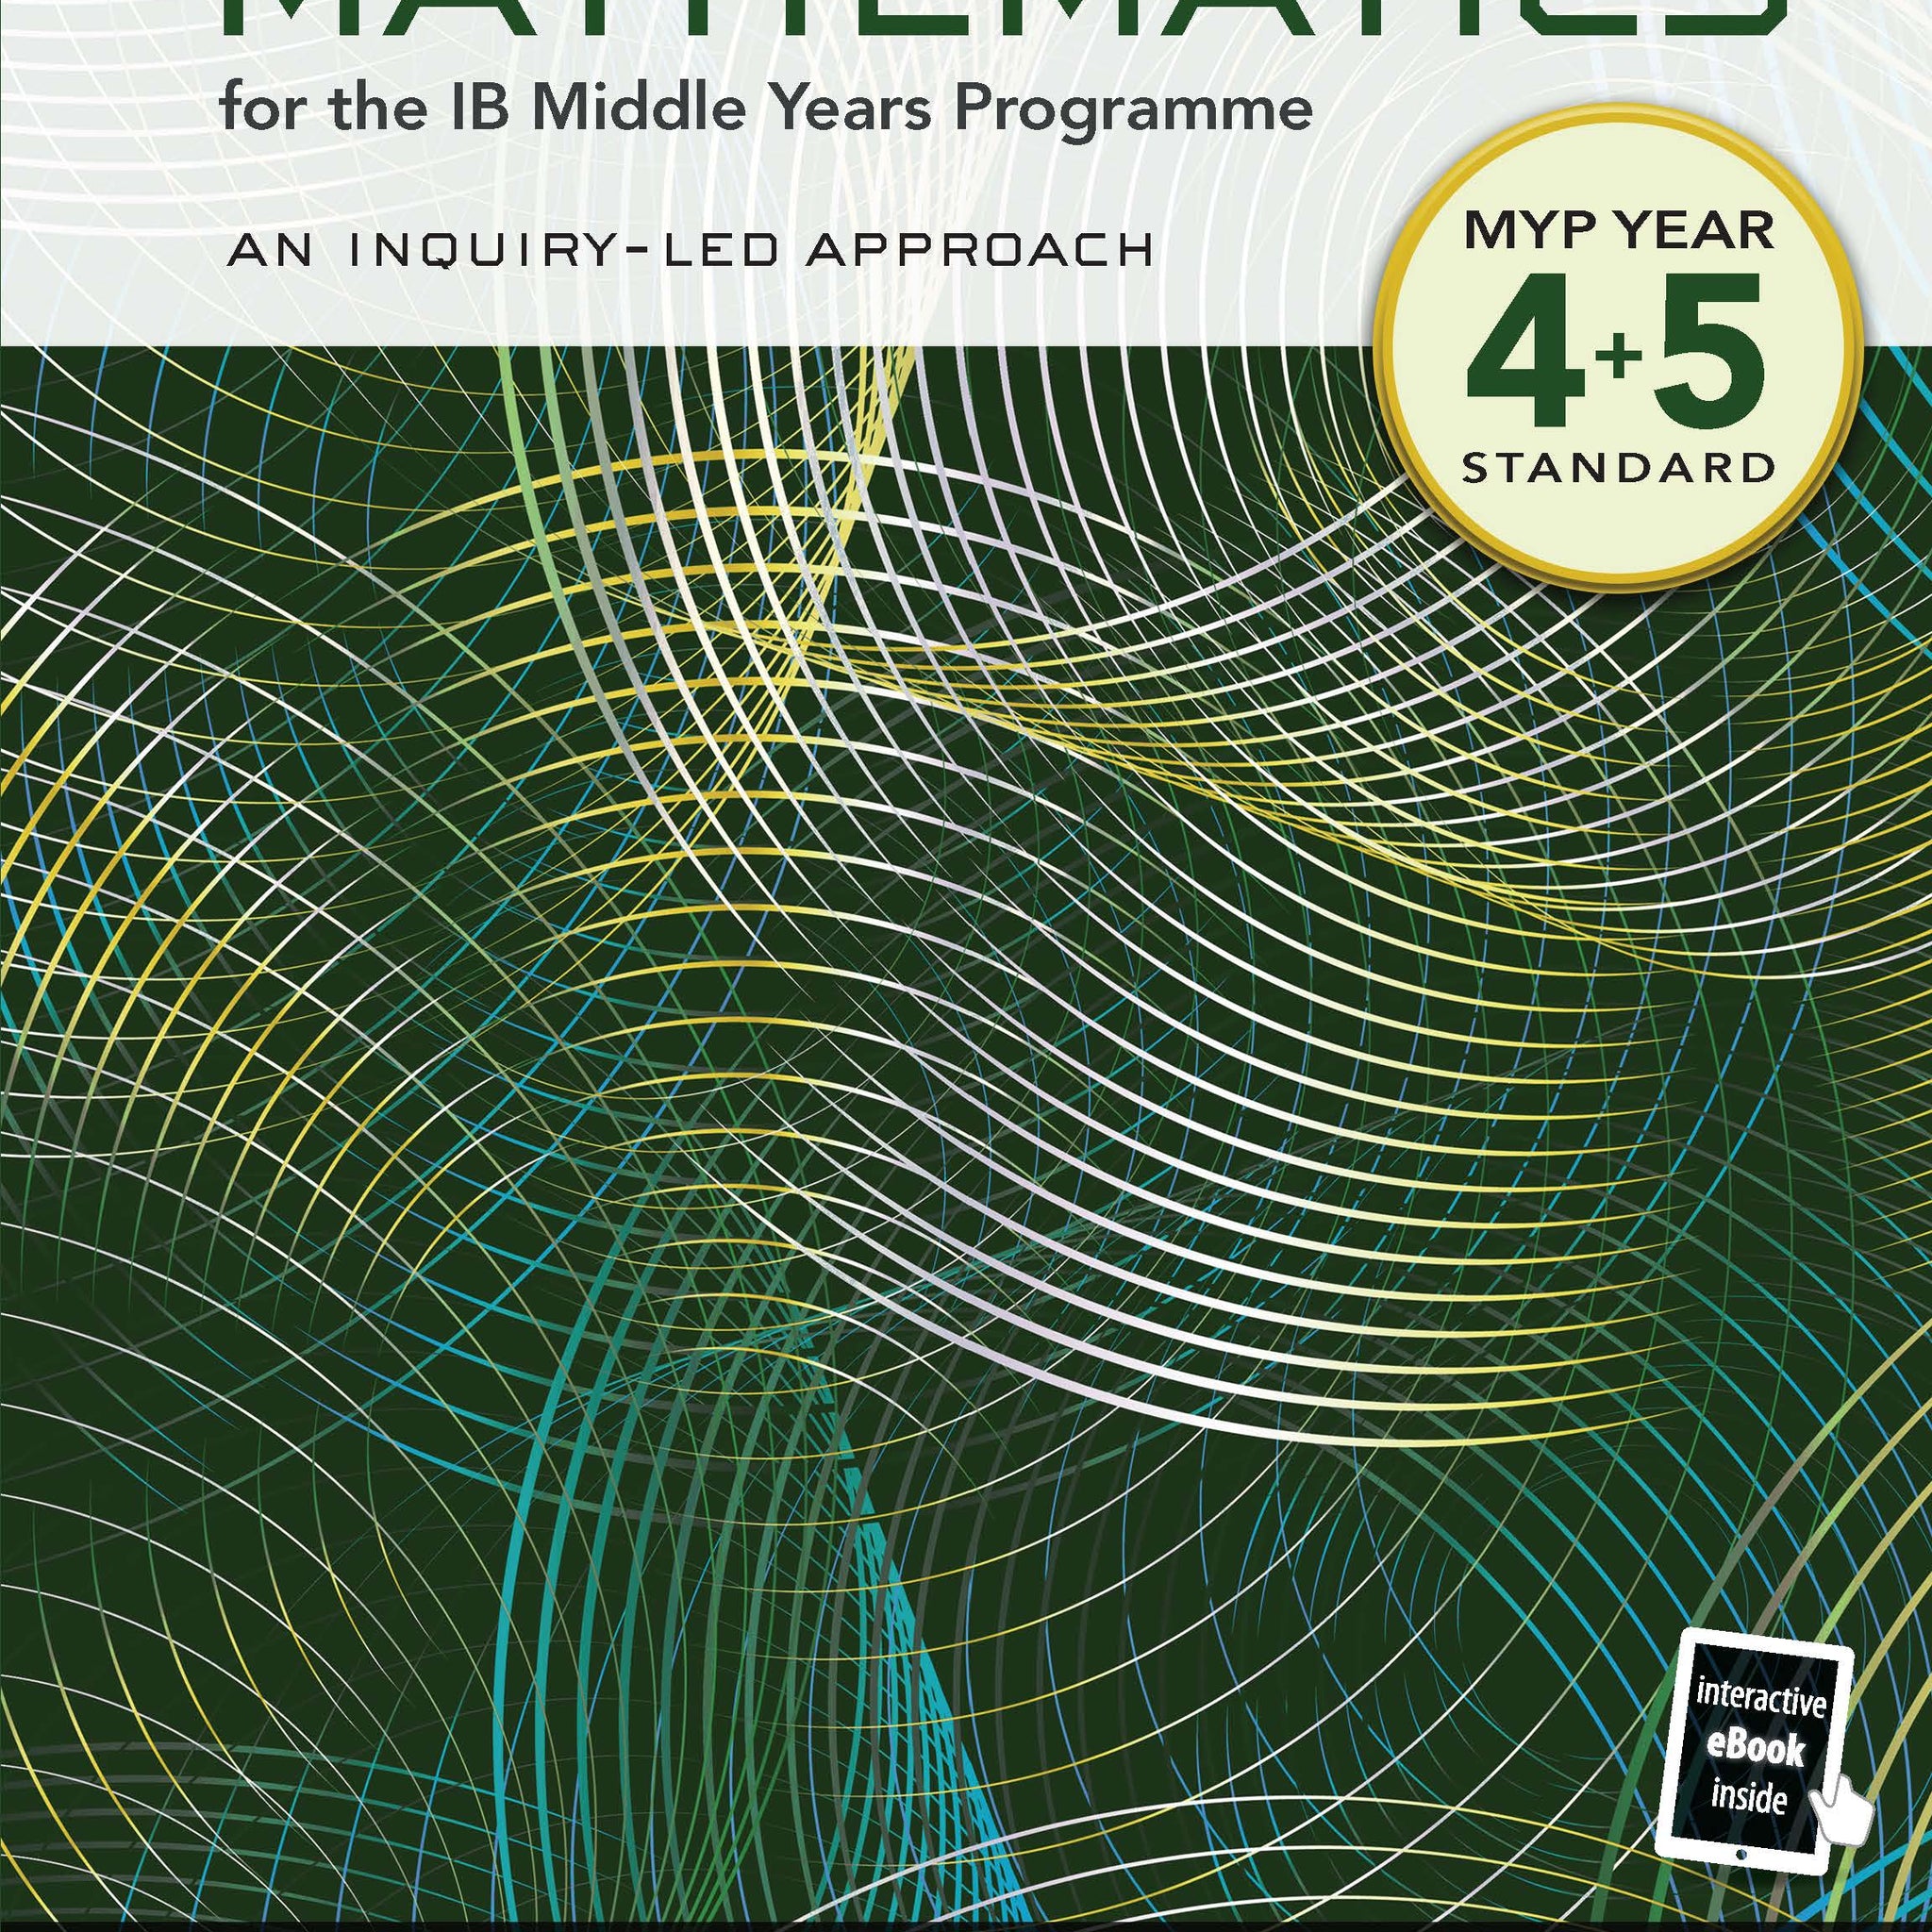 Pearson Mathematics for the IB Middle Years Programme Year 4+5 Standard